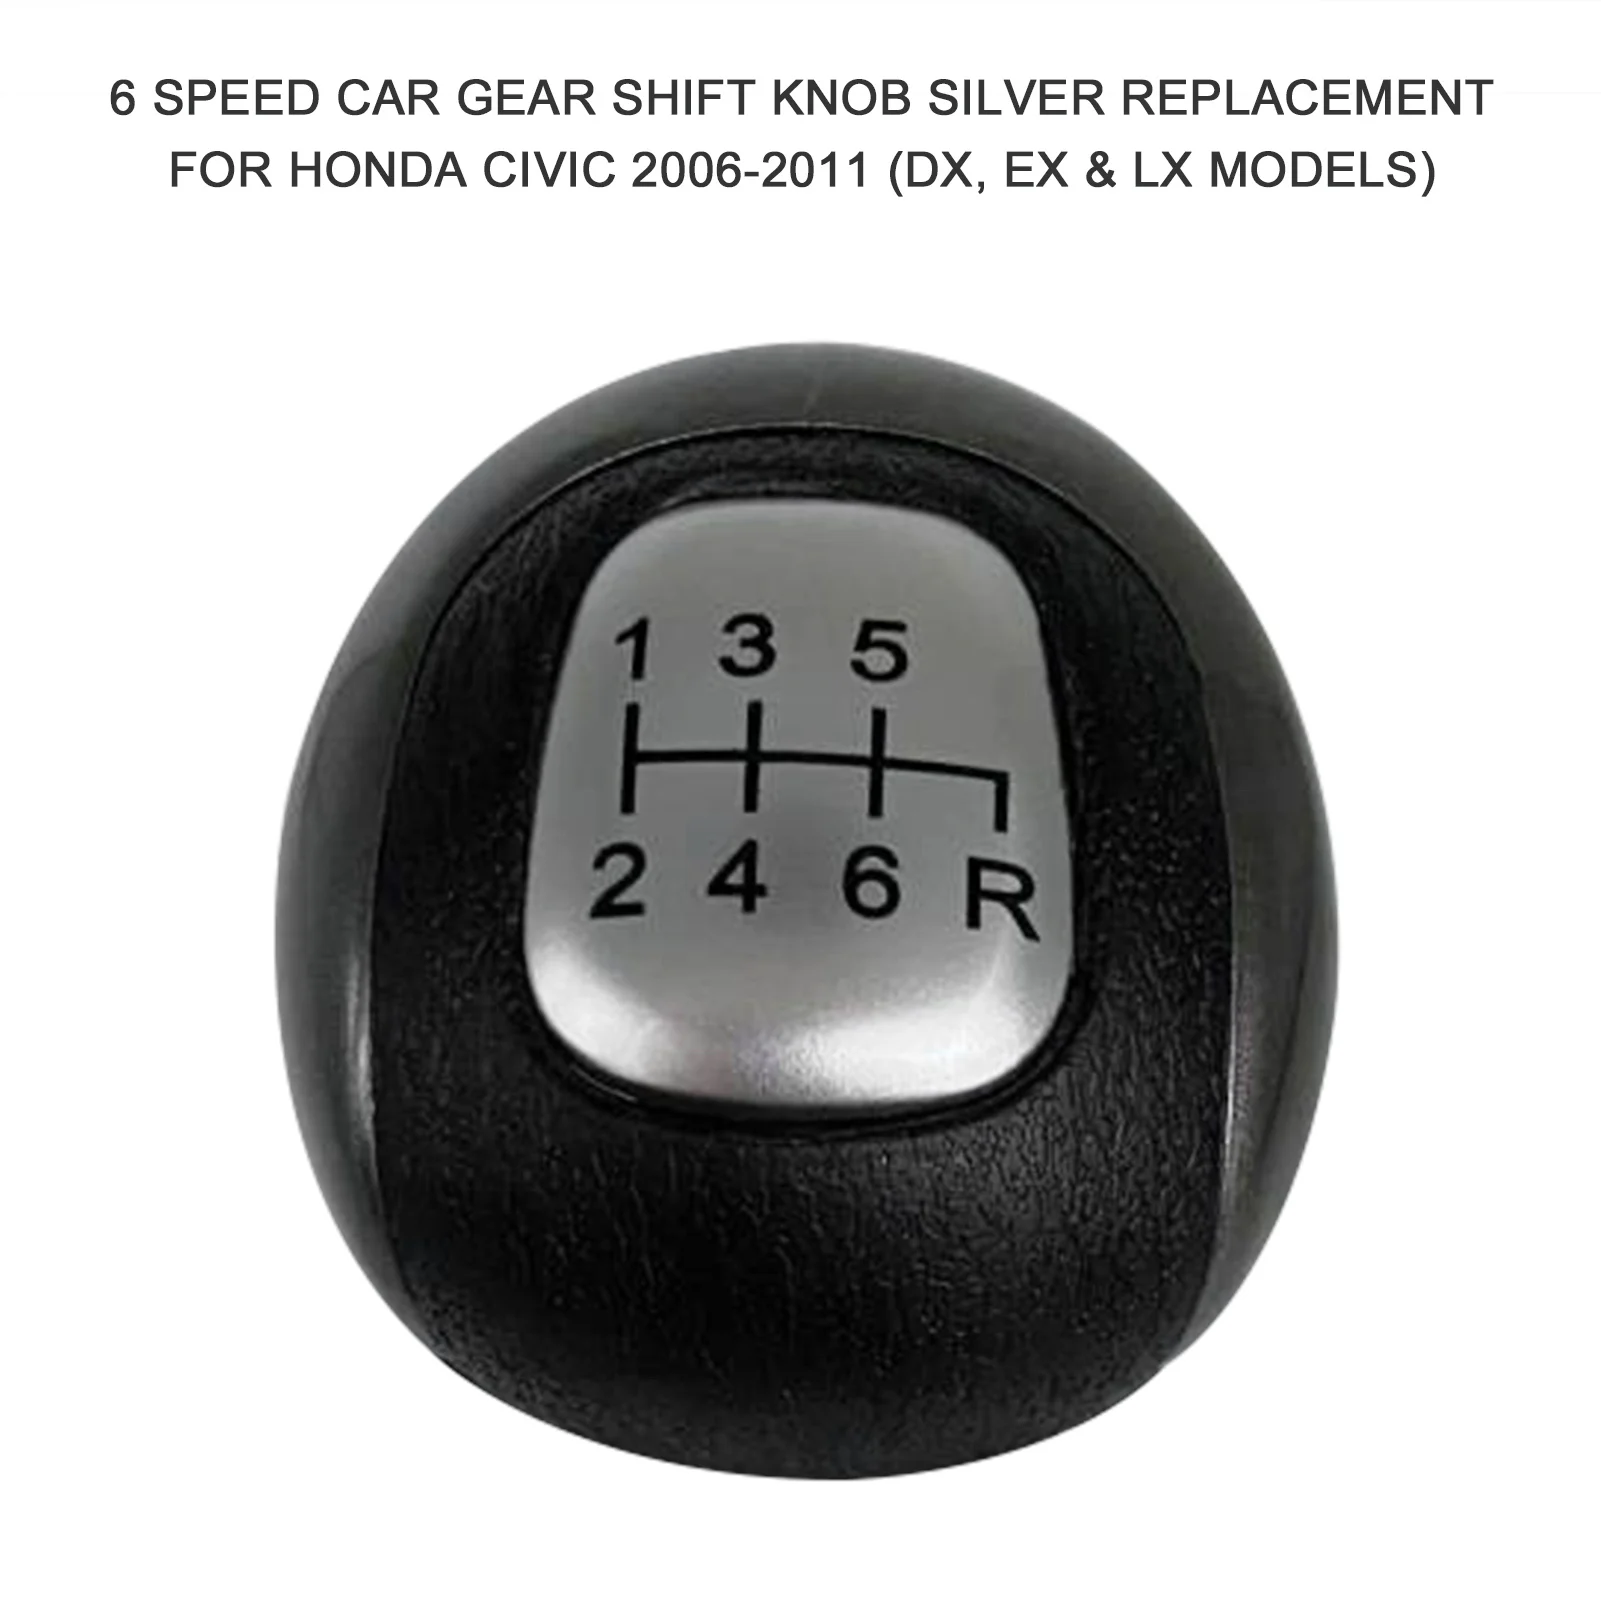 5 speed 6 speed car gear stick gear shift knob sliver gearbox shift knob interior parts replacement for honda civic 2006 2011 free global shipping